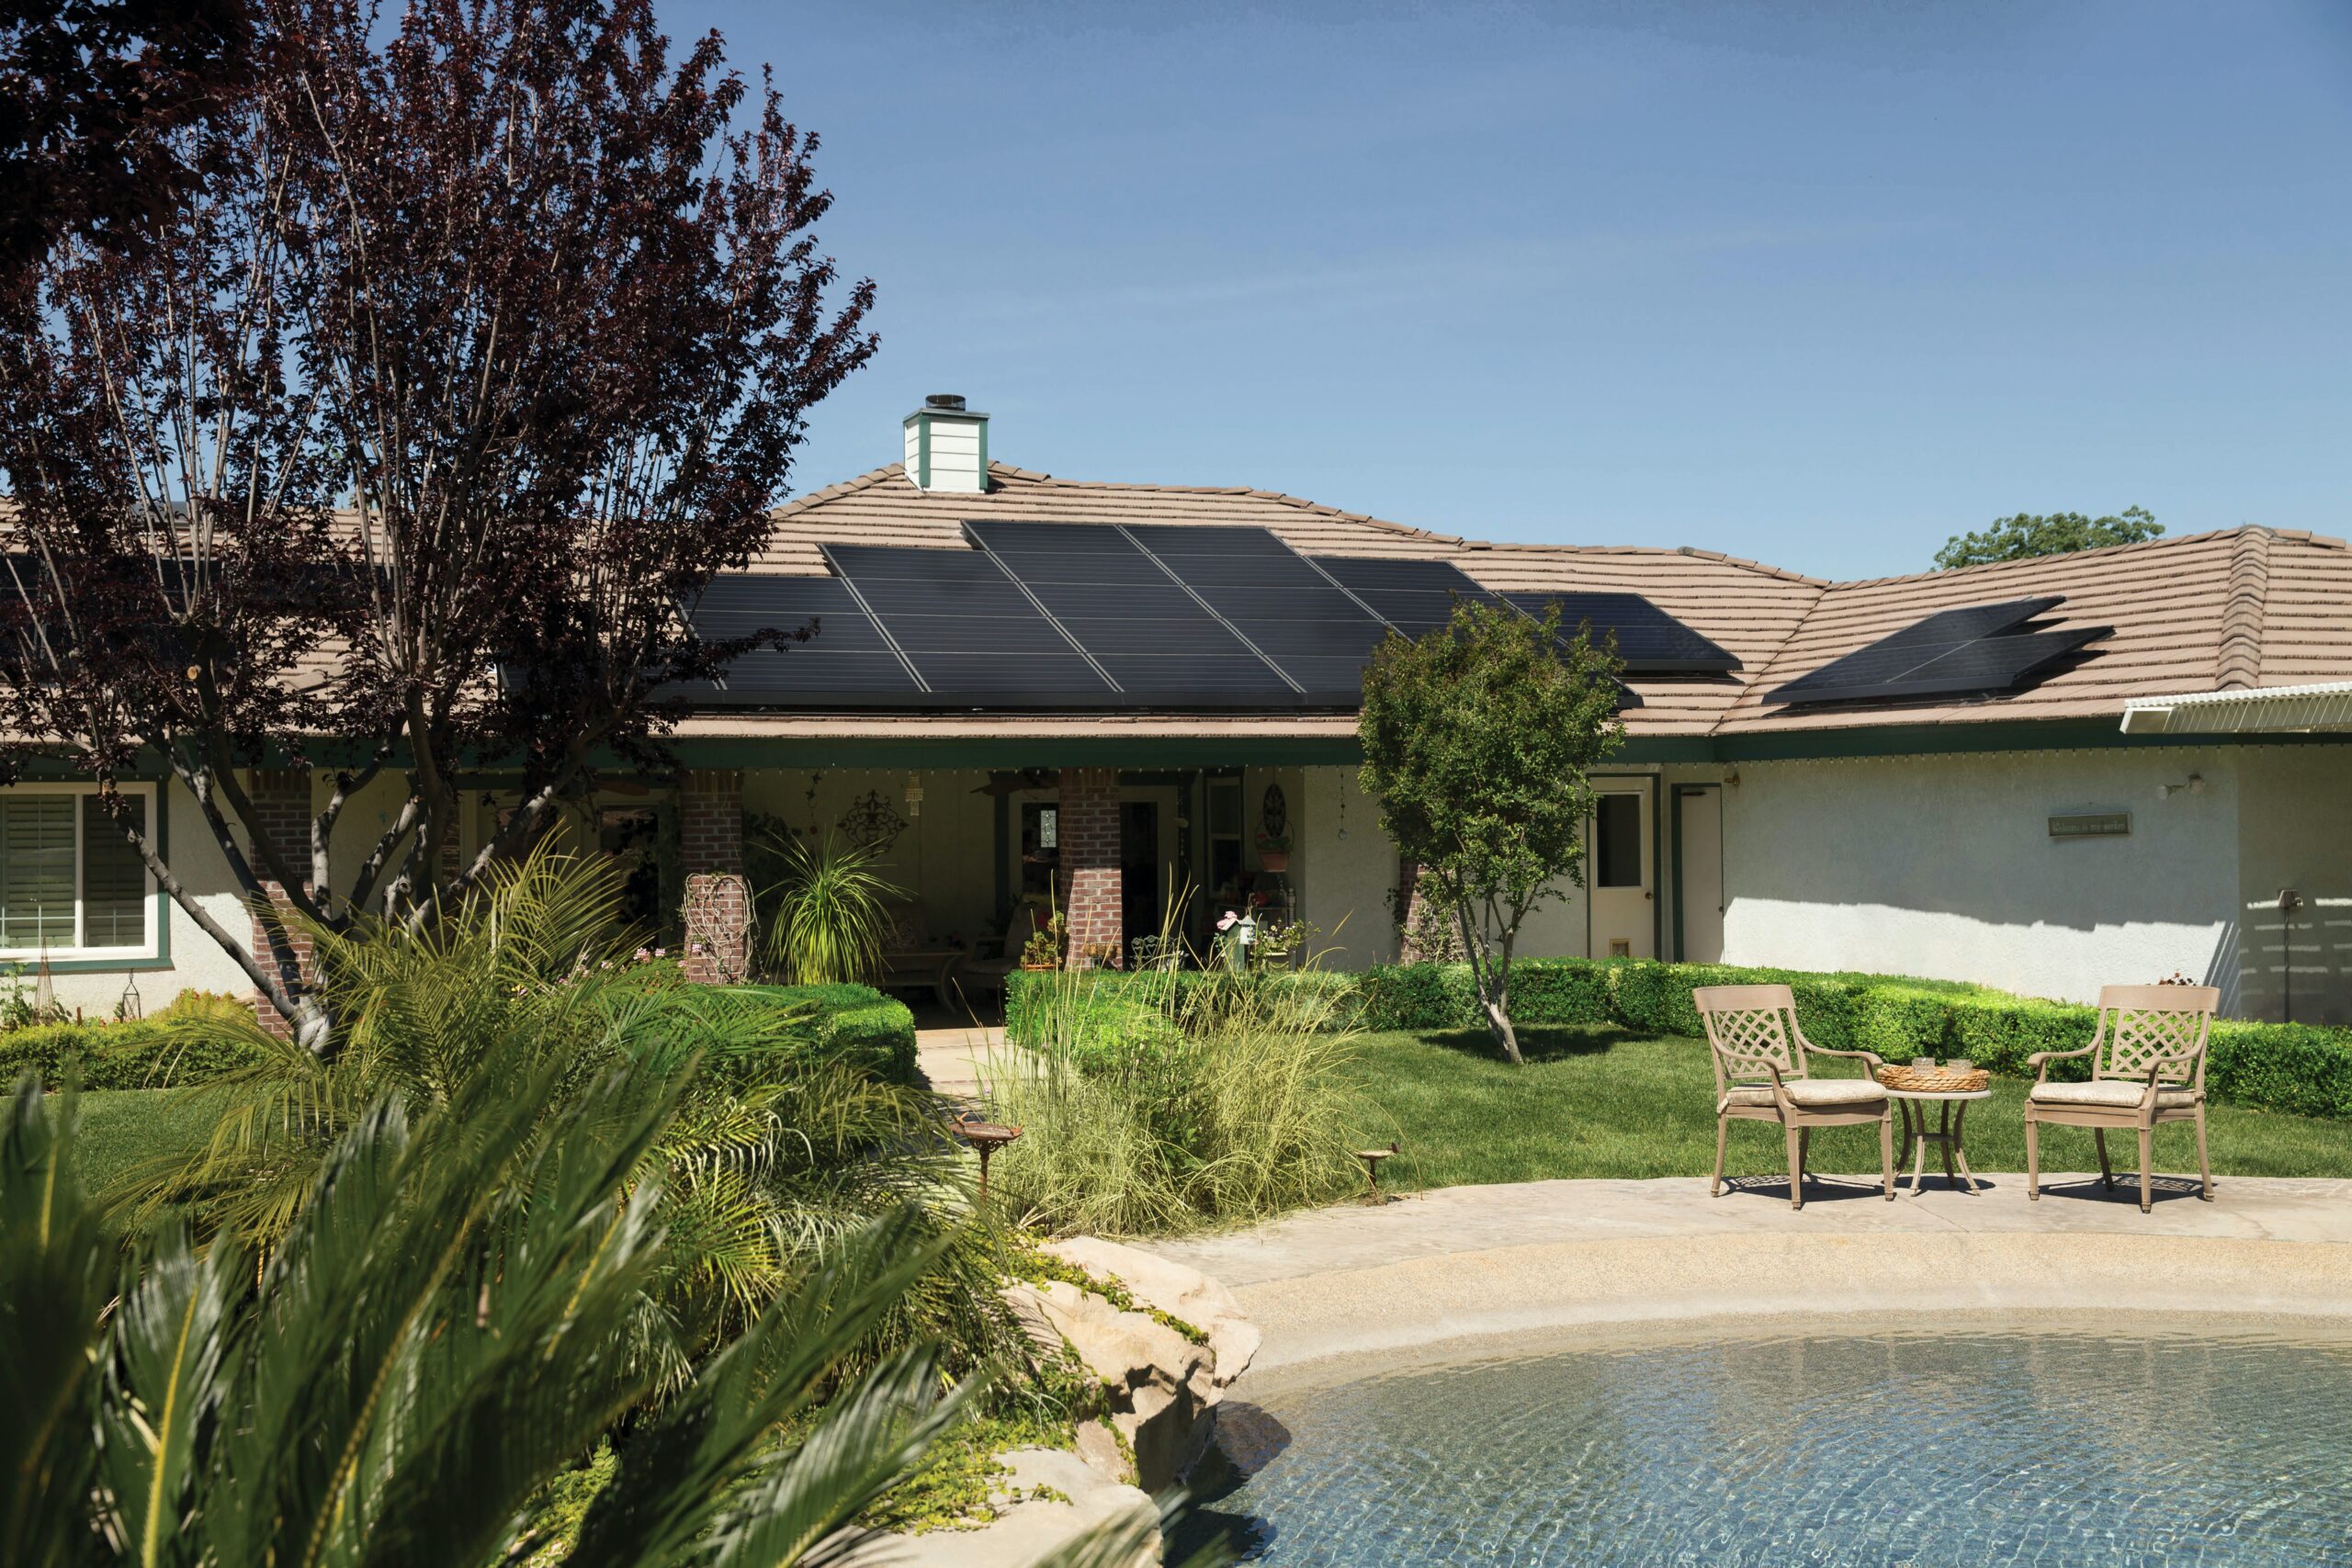 A Laredo, TX home with solar paneling